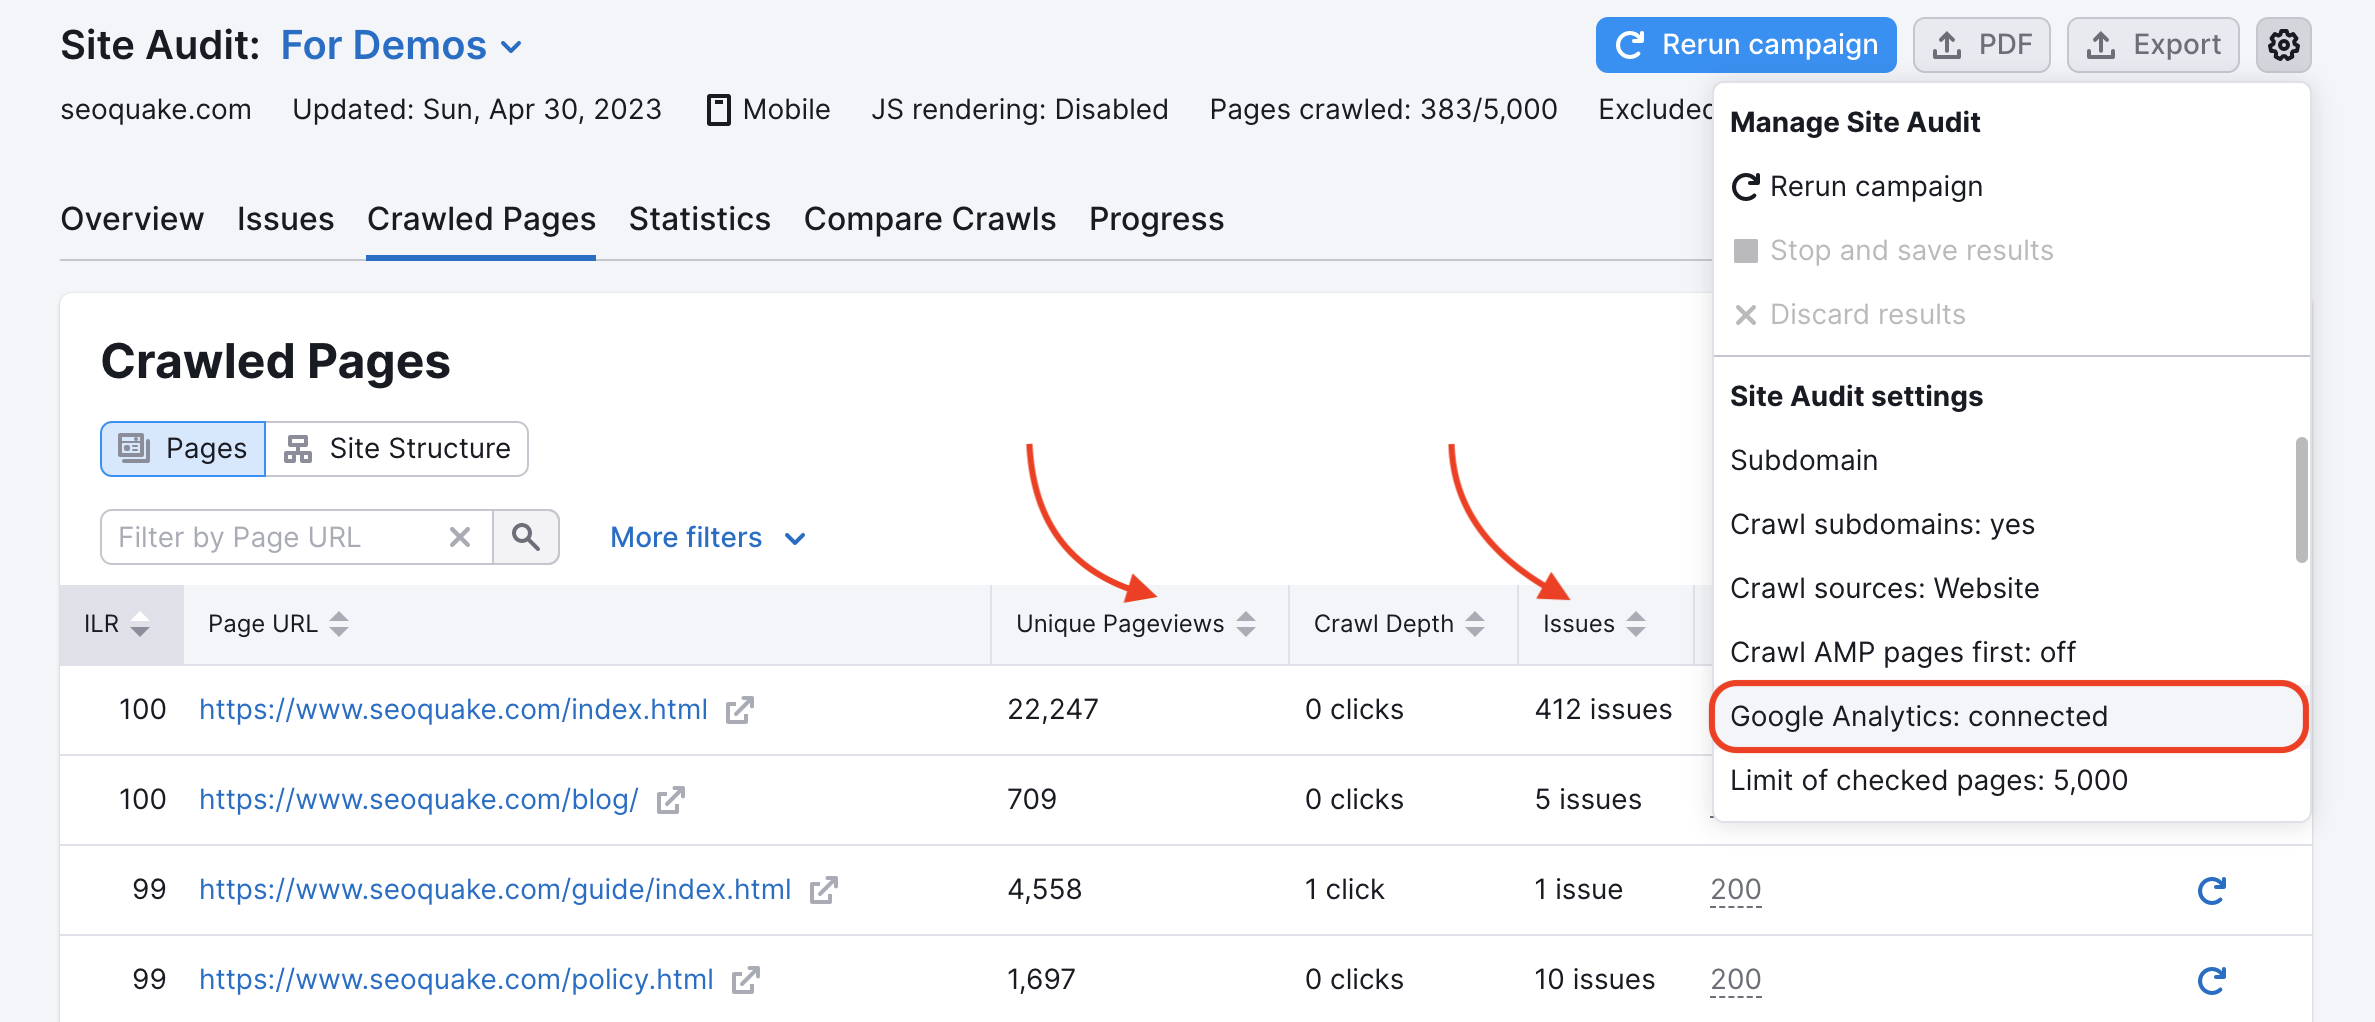 The Google Analytics integration settings on the Crawled Pages report. Providing an example of what Google Analytics data looks like in Semrush. Two red arrows are pointing at the special metrics: Unique Pageviews and Issues; a settings list is opened via the gear icon on the right with the "Google Analytics: connected" text being highlighted.